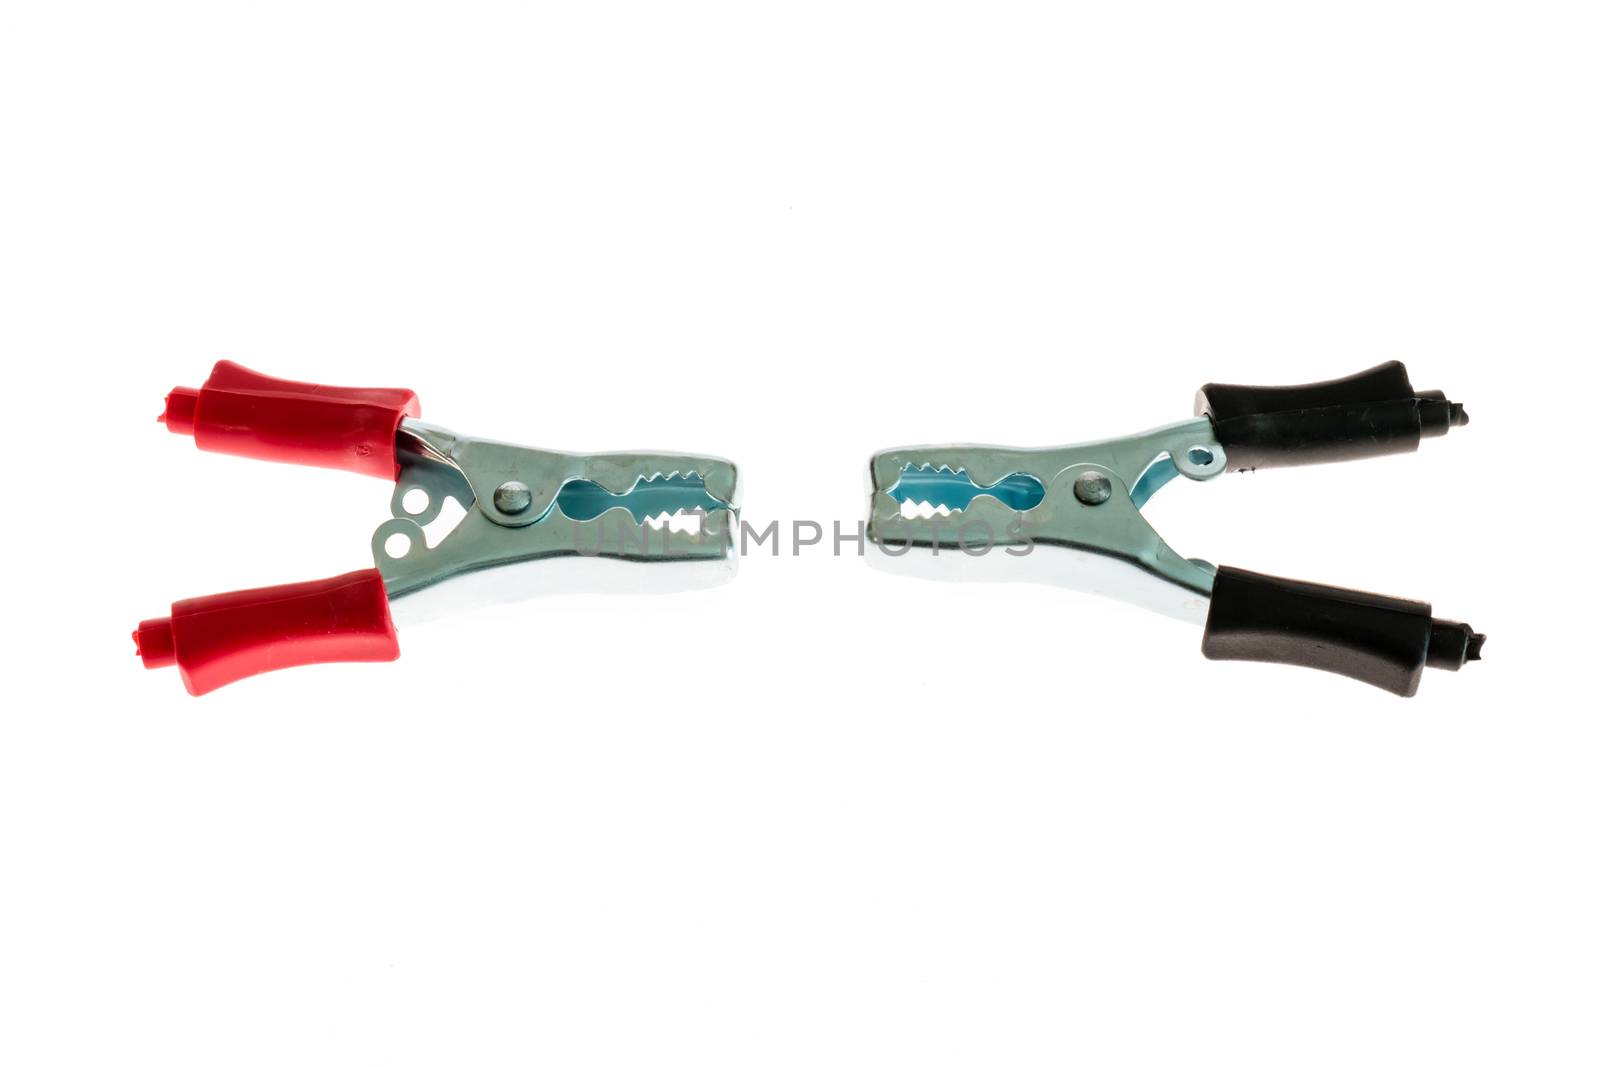 Electrical metal clamps with insulated red and black